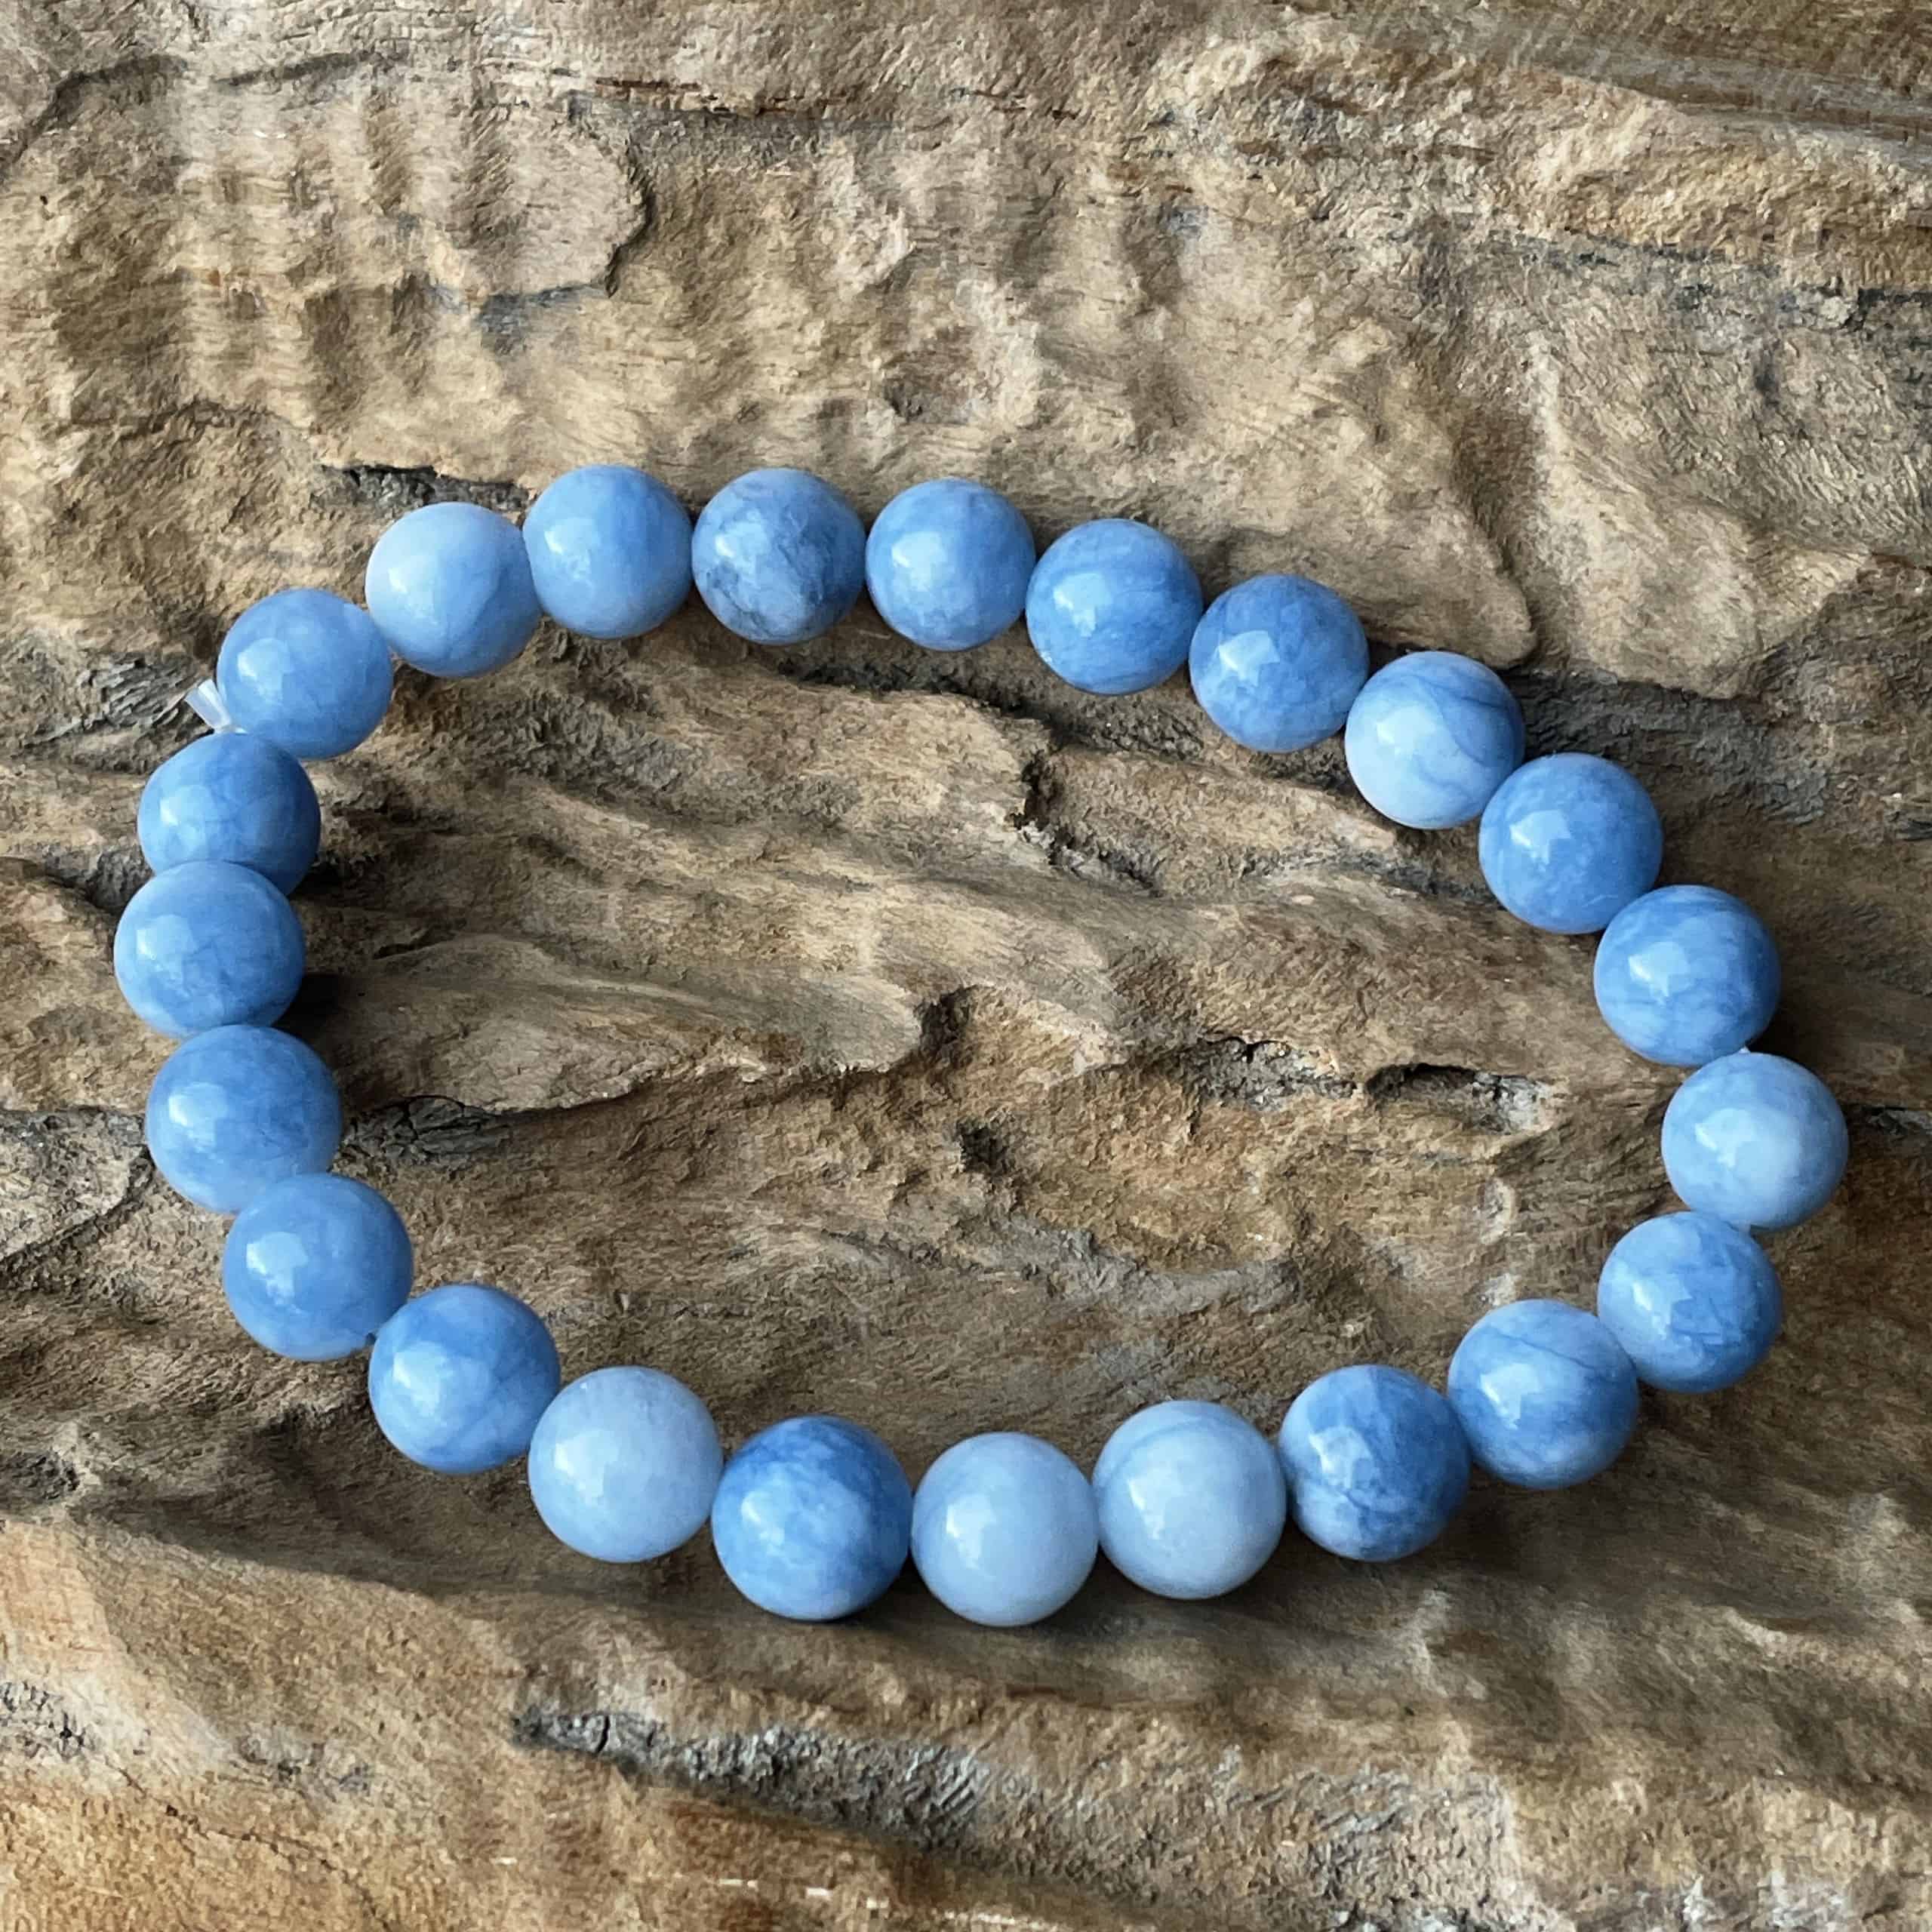 Buy Blue Lace Agate Bracelet Crystal Stone 7 mm Beads for Healing and  Crystal Healing Stones Bracelet (Color : Light Blue) at Amazon.in